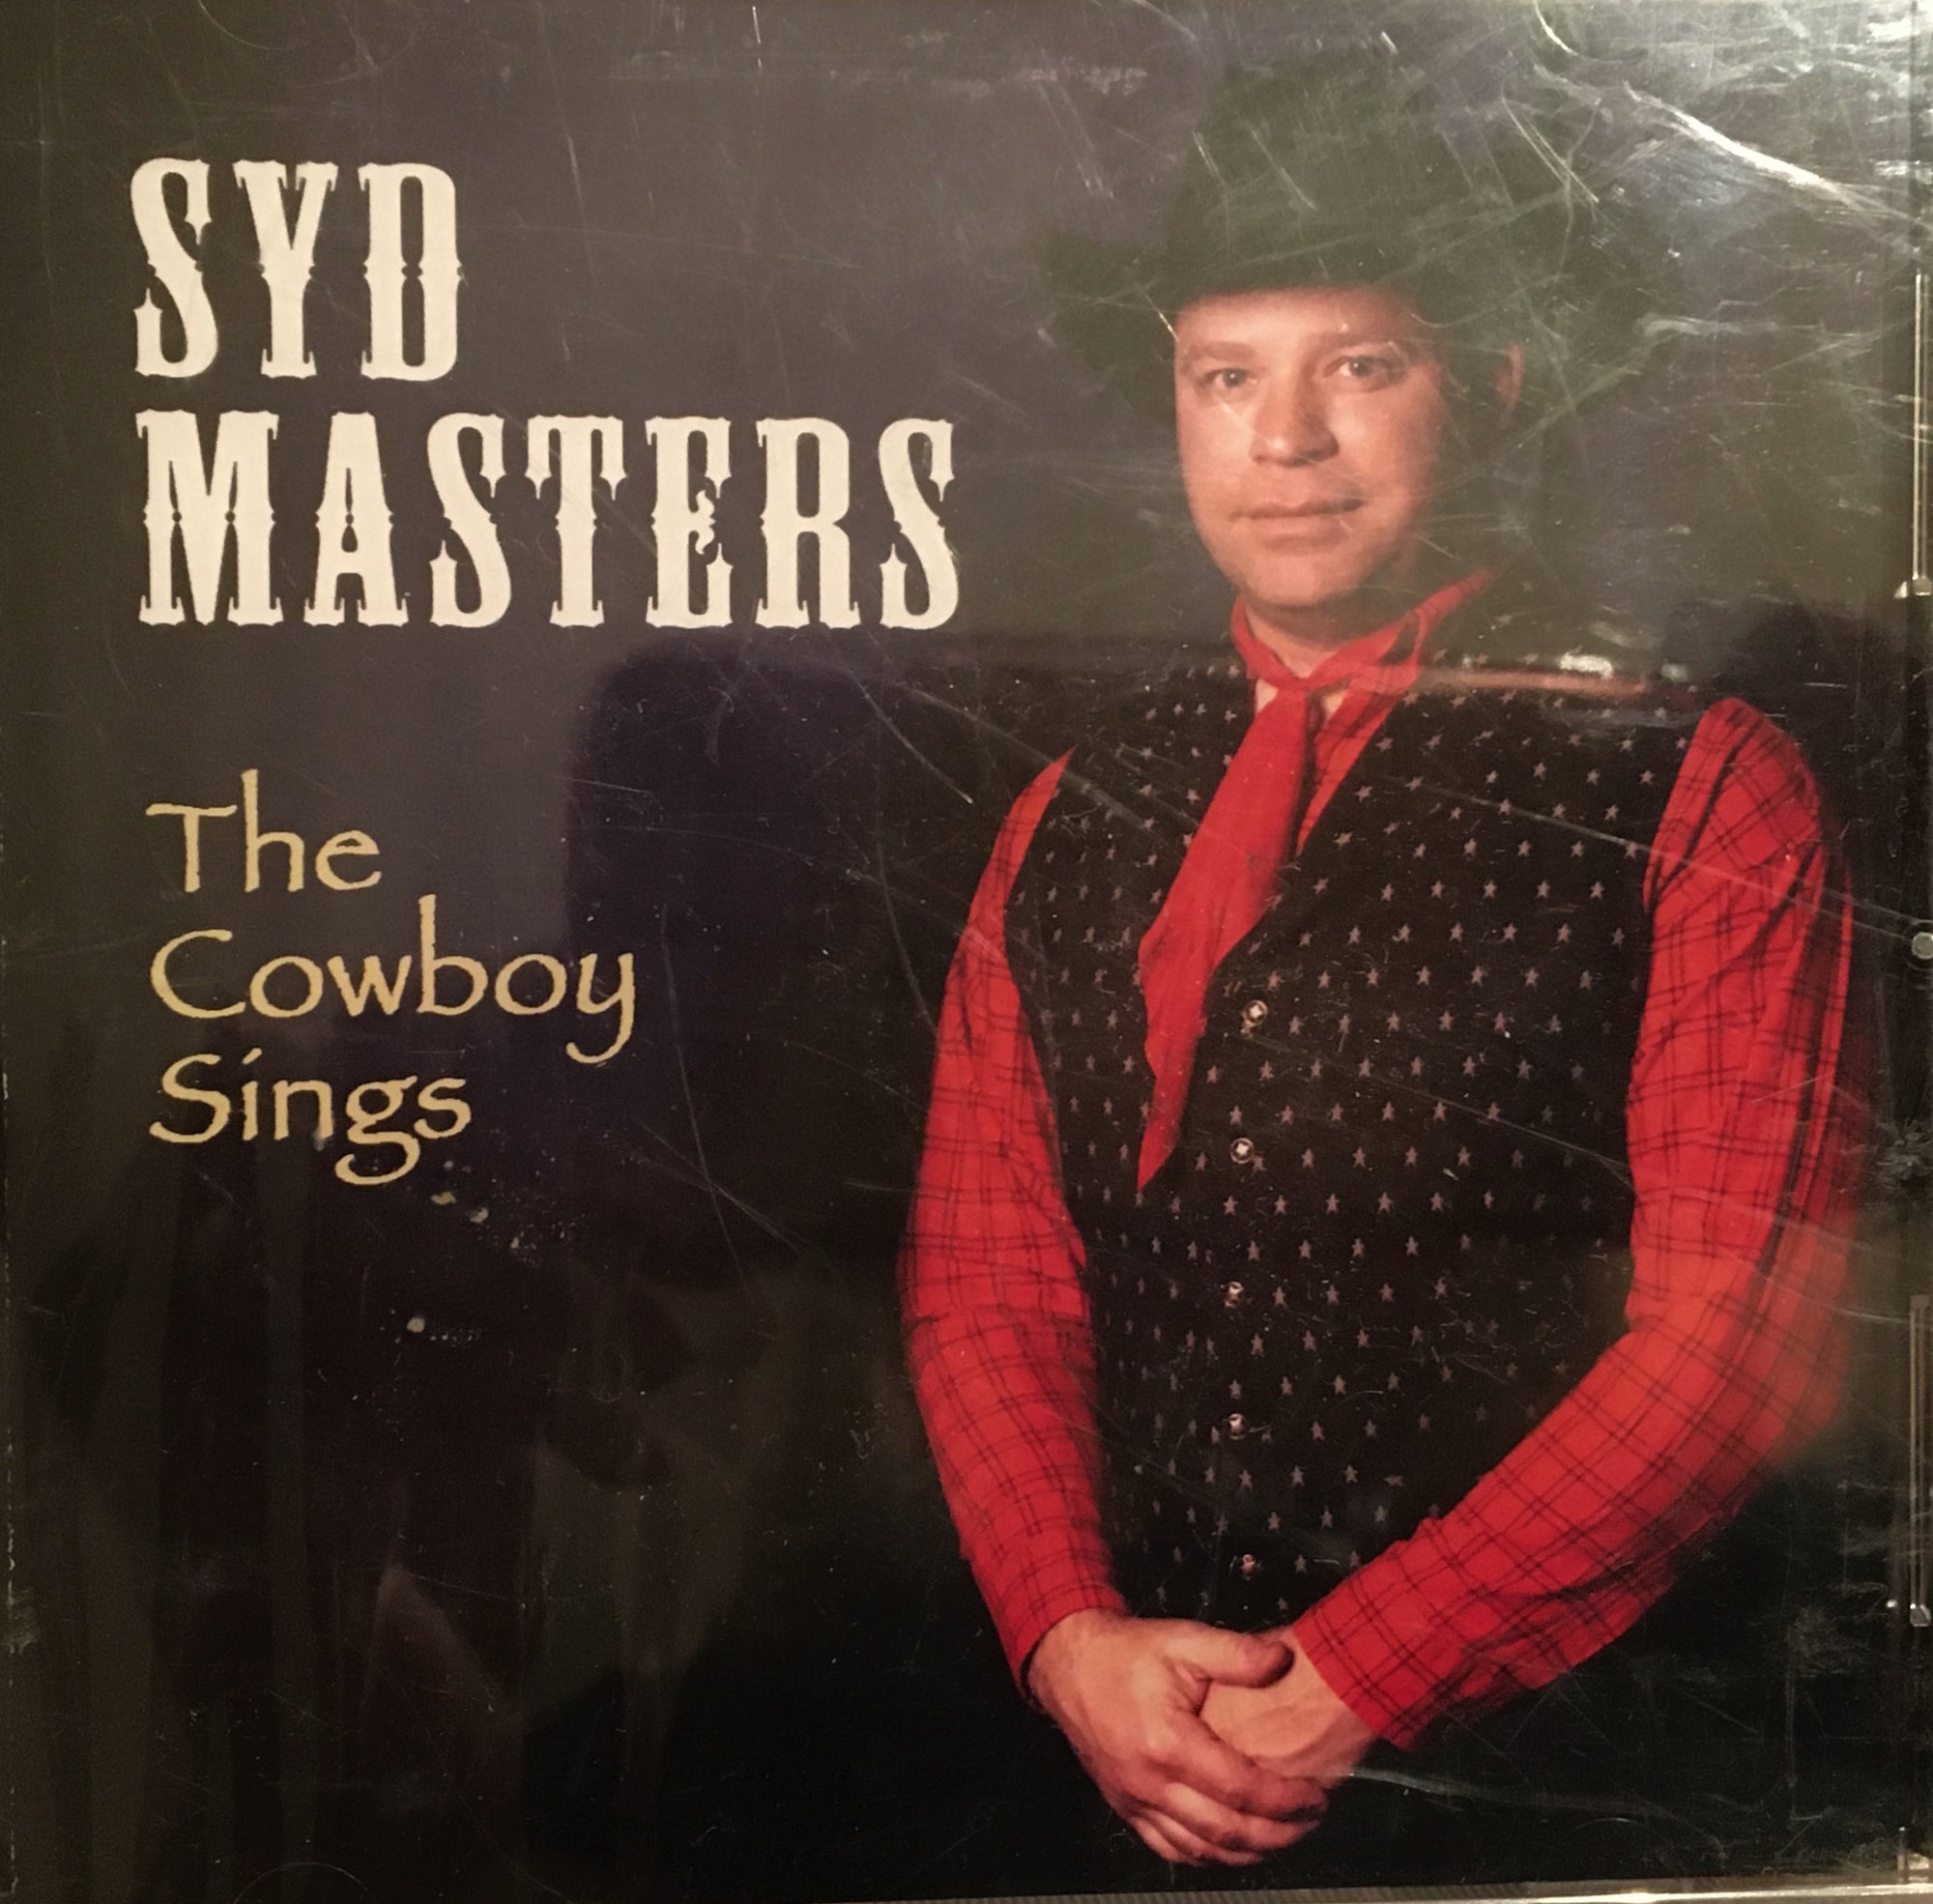 CD The Cowboy Sings by Syd Masters